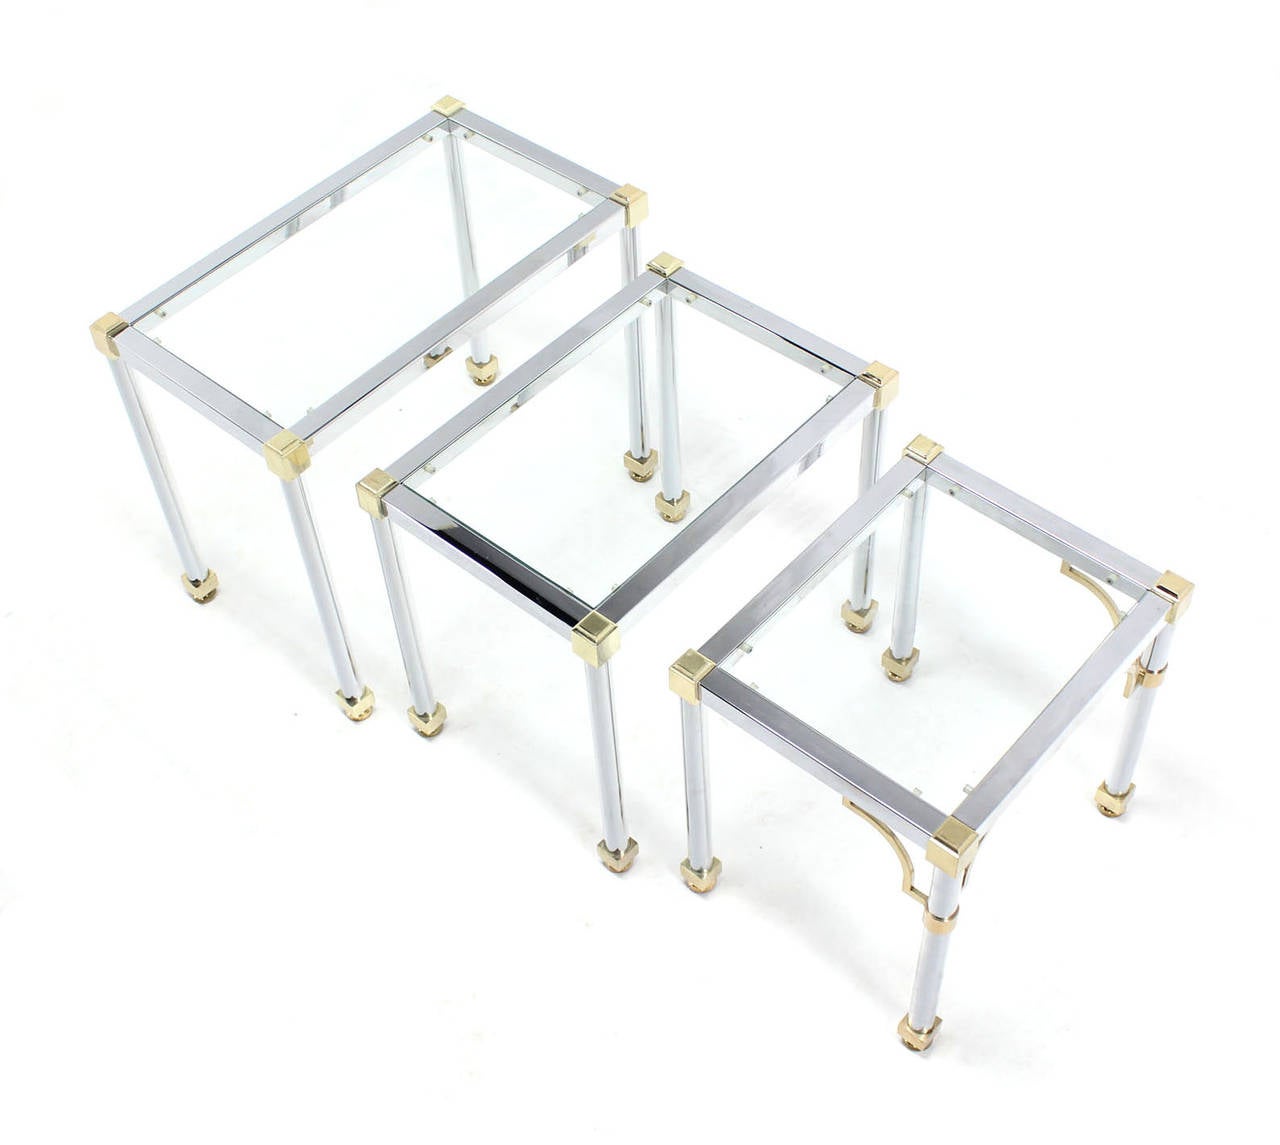 Set of Three Chrome and Brass Nesting Tables In Excellent Condition For Sale In Rockaway, NJ